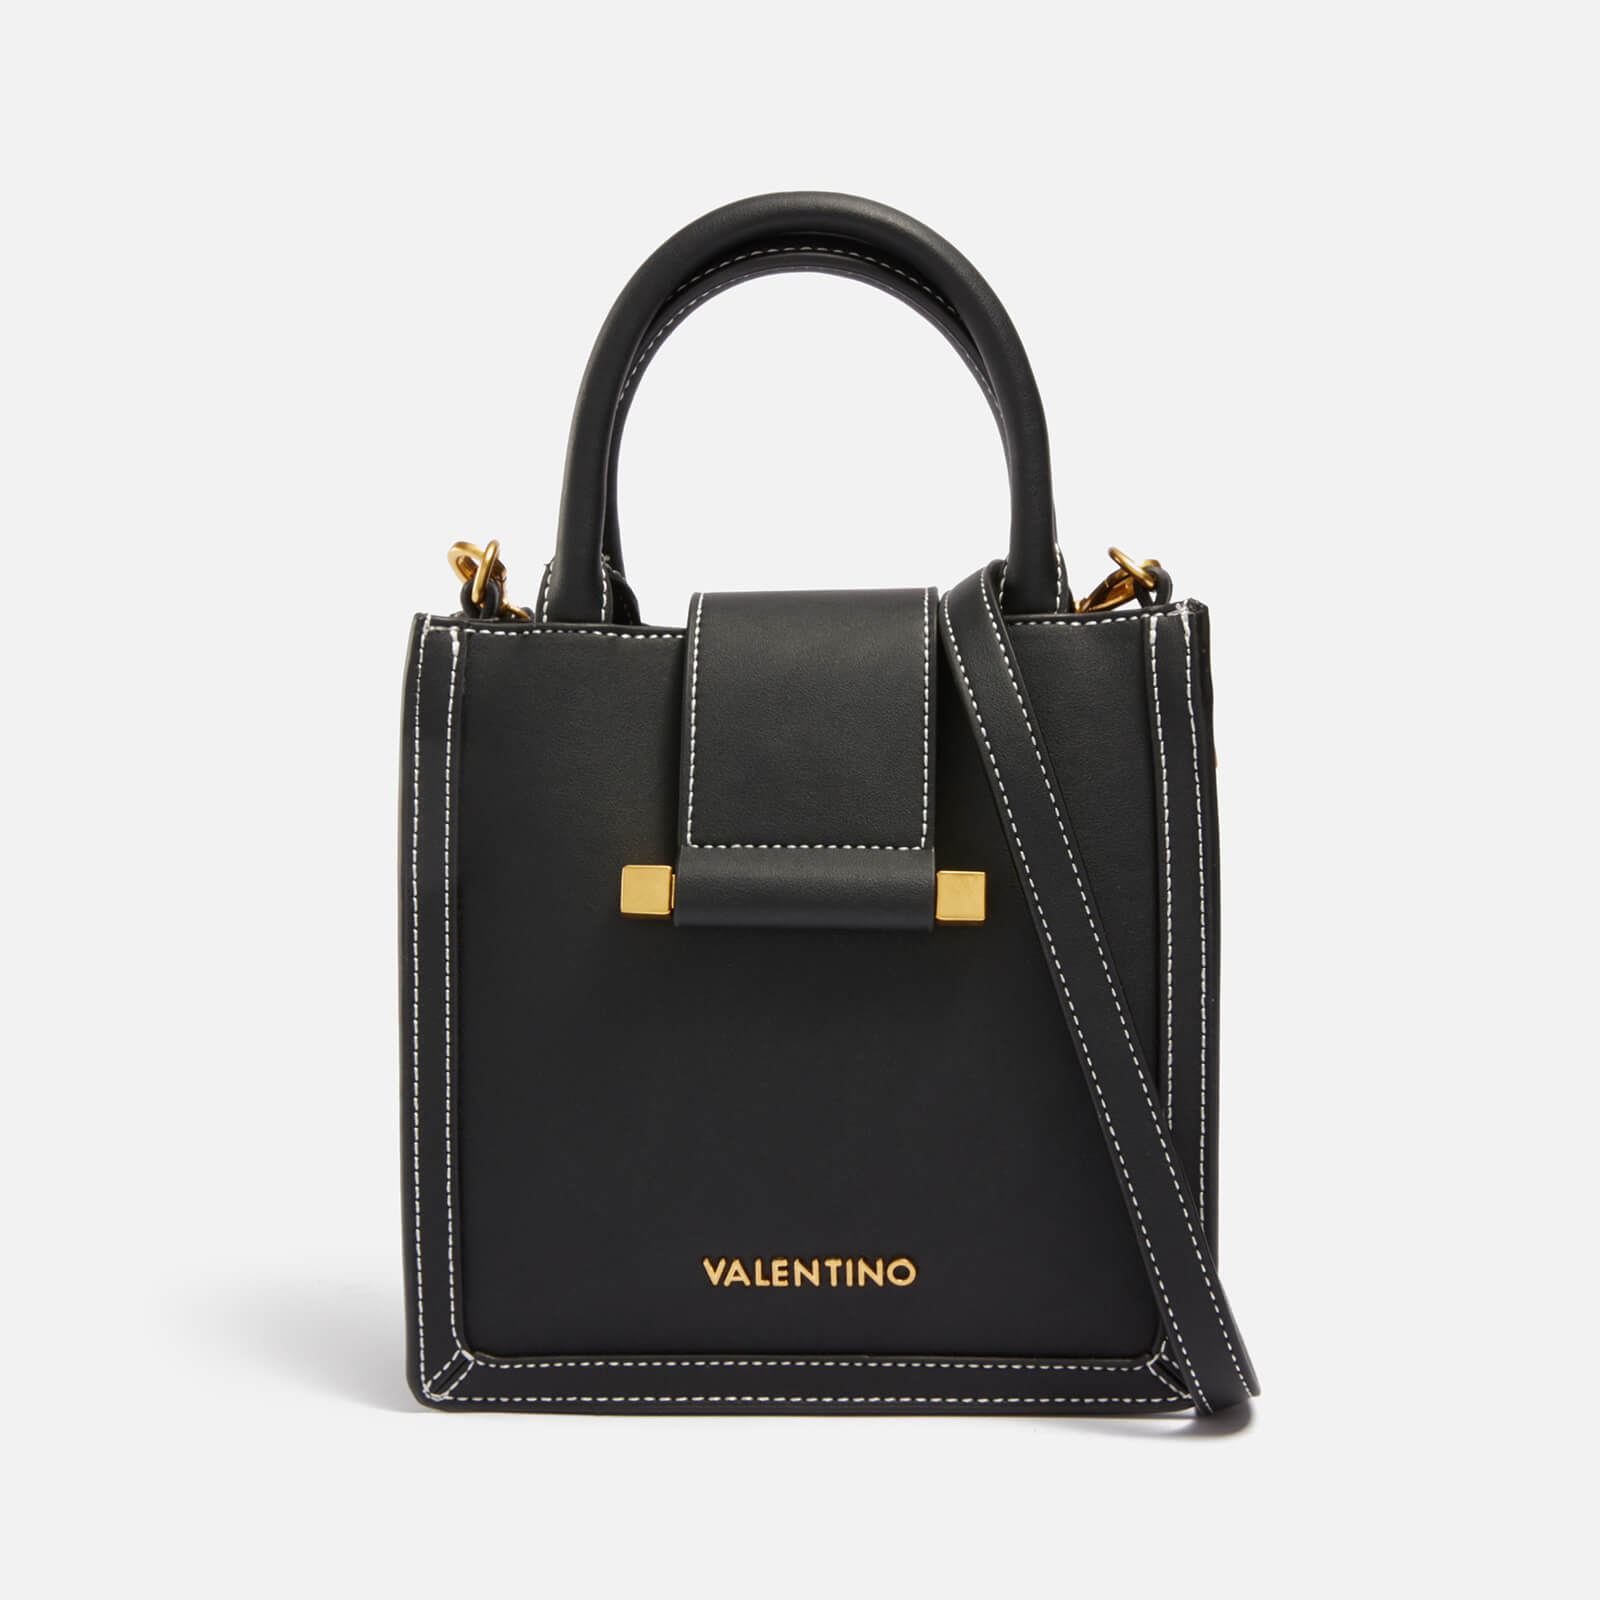 Valentino Frosty Re Faux Leather Tote Bag